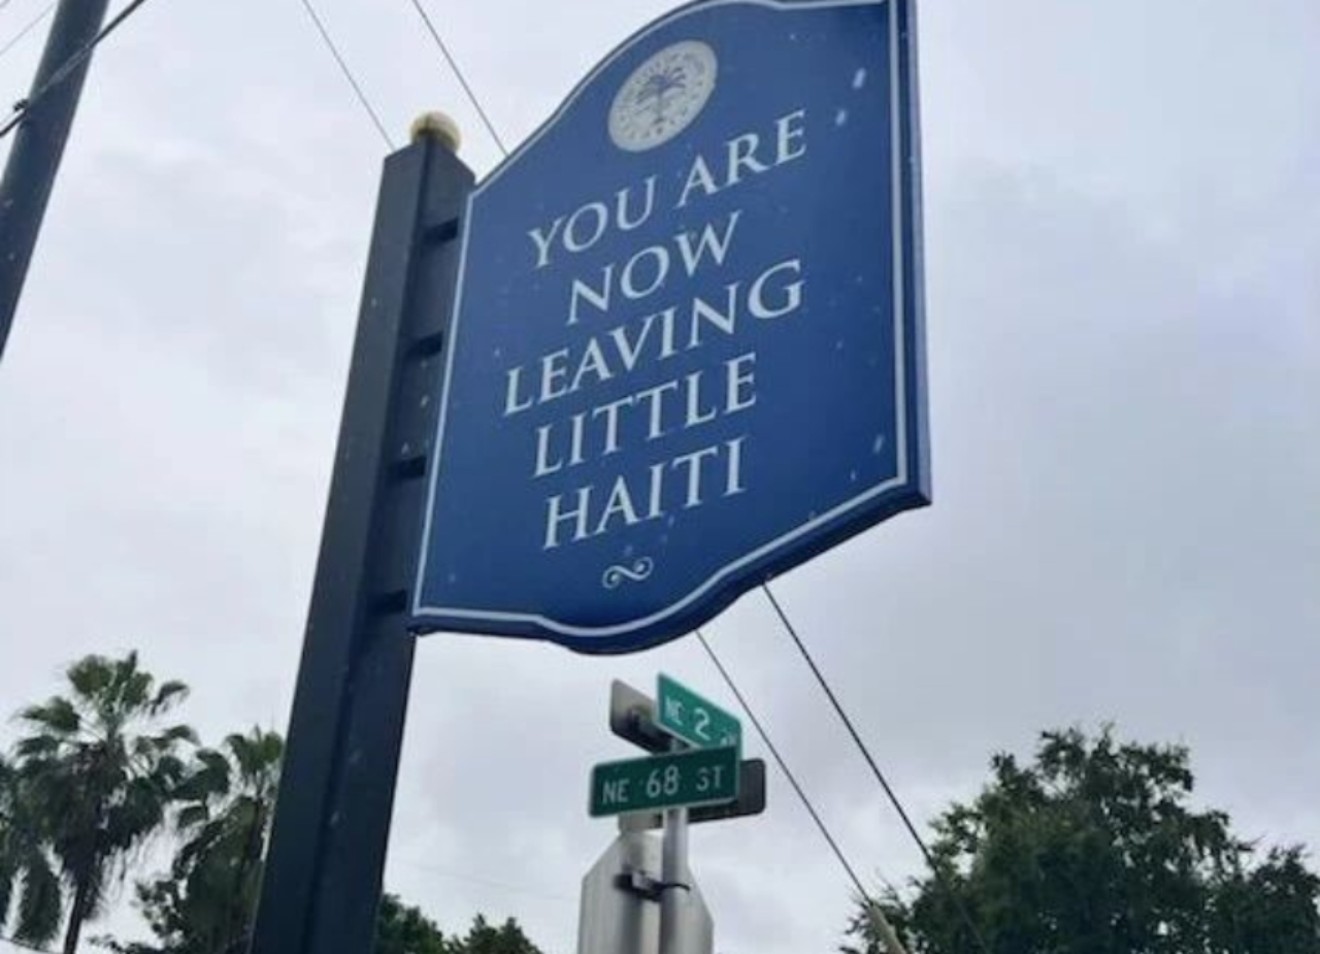 A sign at NE 68th Street and NE Second Avenue implies that Little Haiti is much smaller than it should be, leaving some residents worried about a shrinking neighborhood.